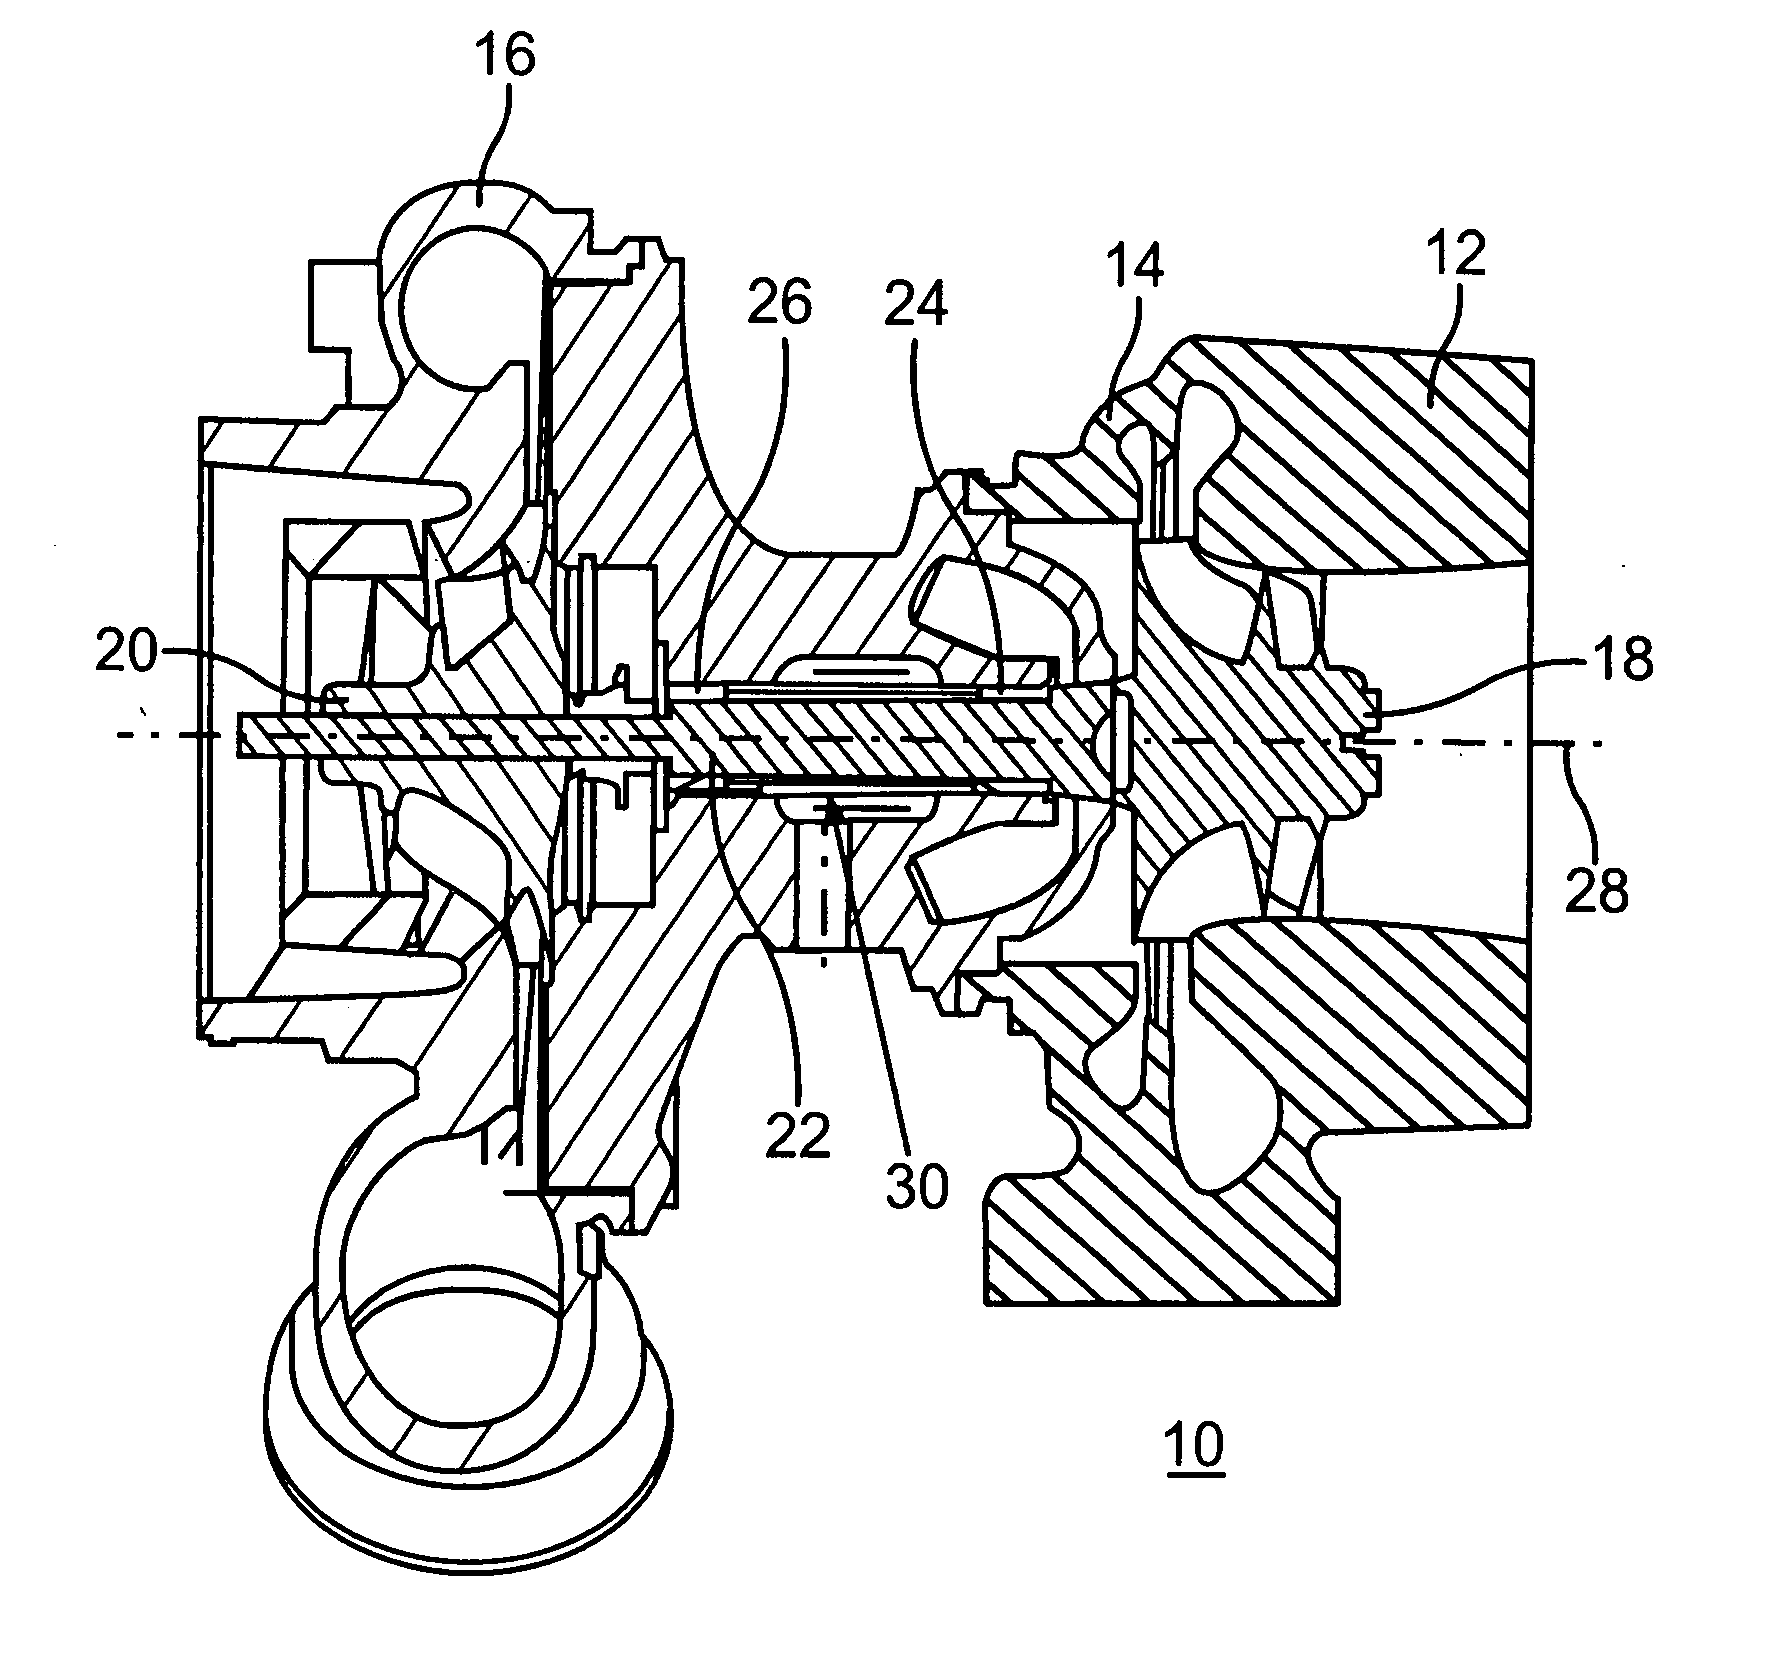 Sleeve element for axially fixing a bearing and exhaust gas turbocharger